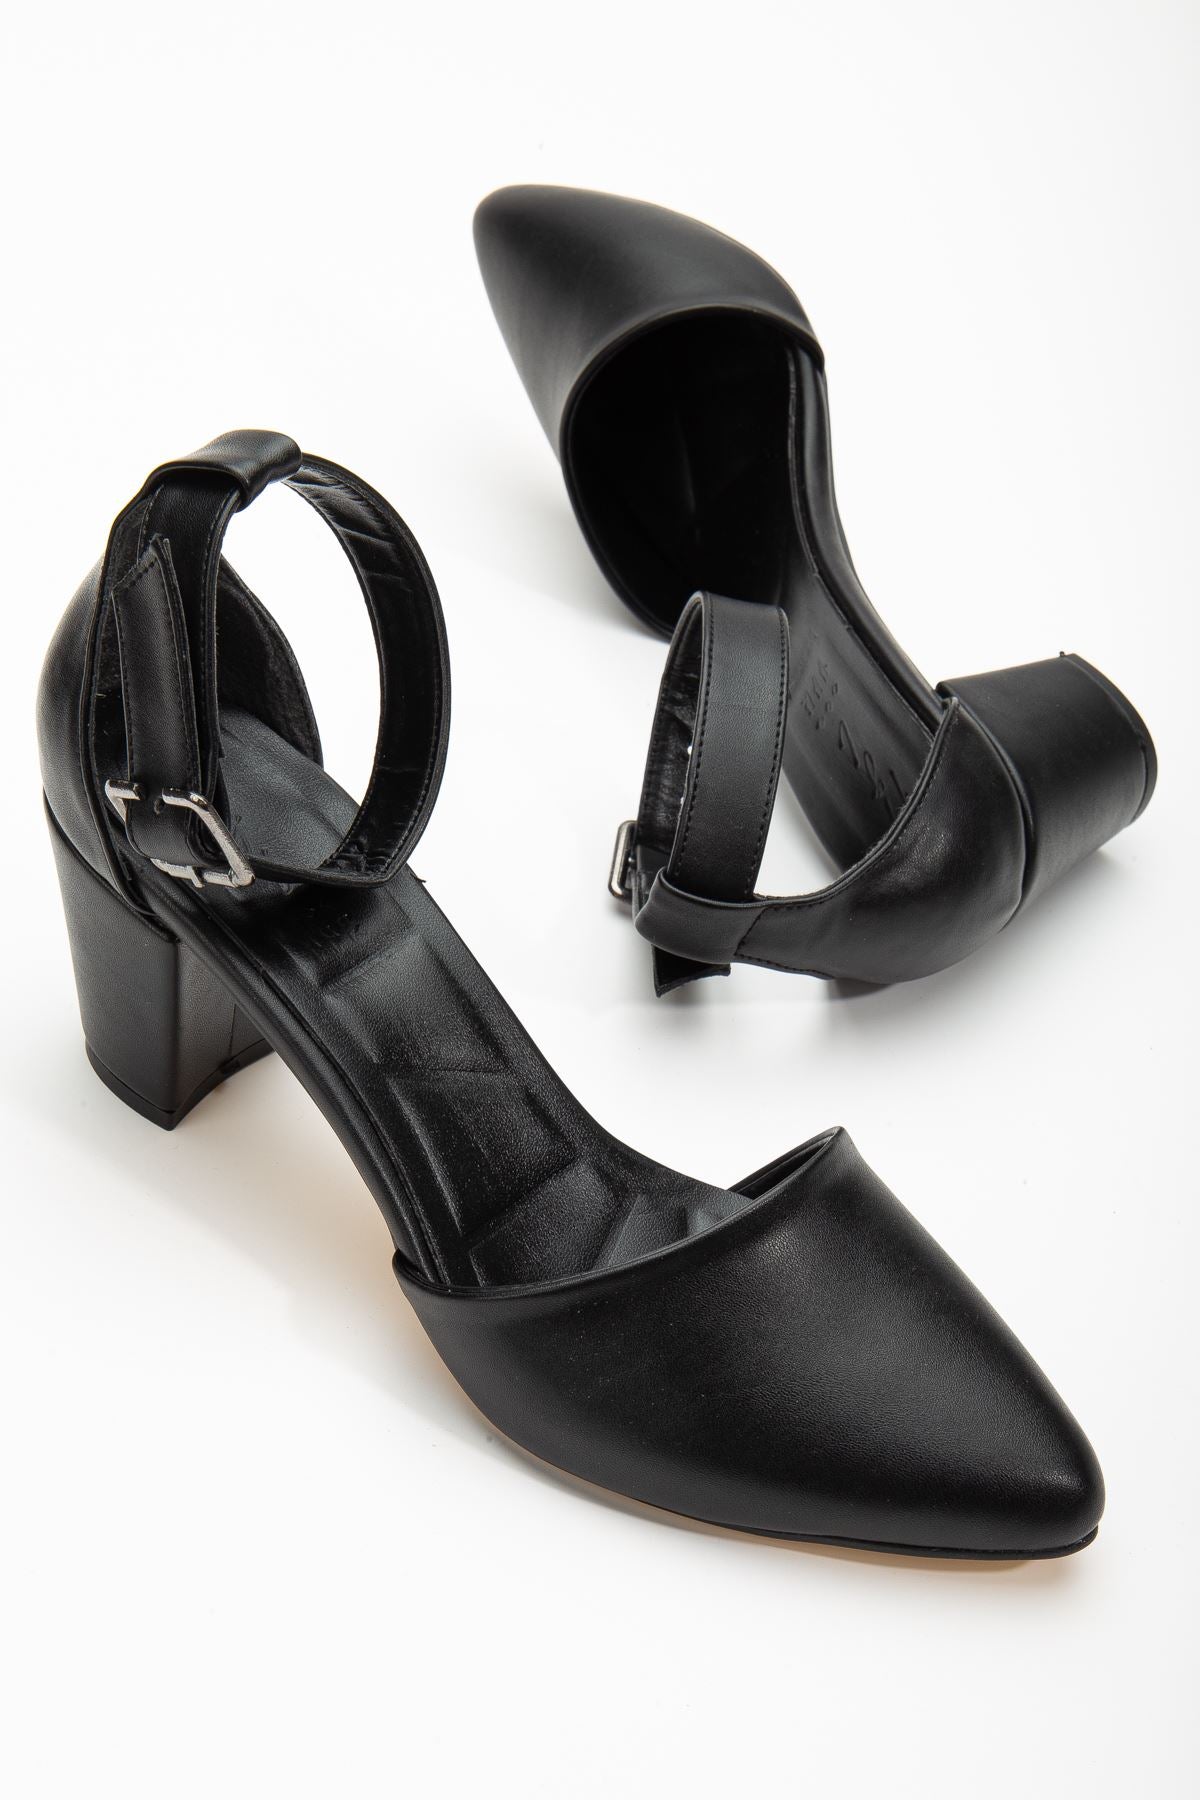 Lottis Black Leather Detailed Heeled Women's Shoes - STREETMODE ™